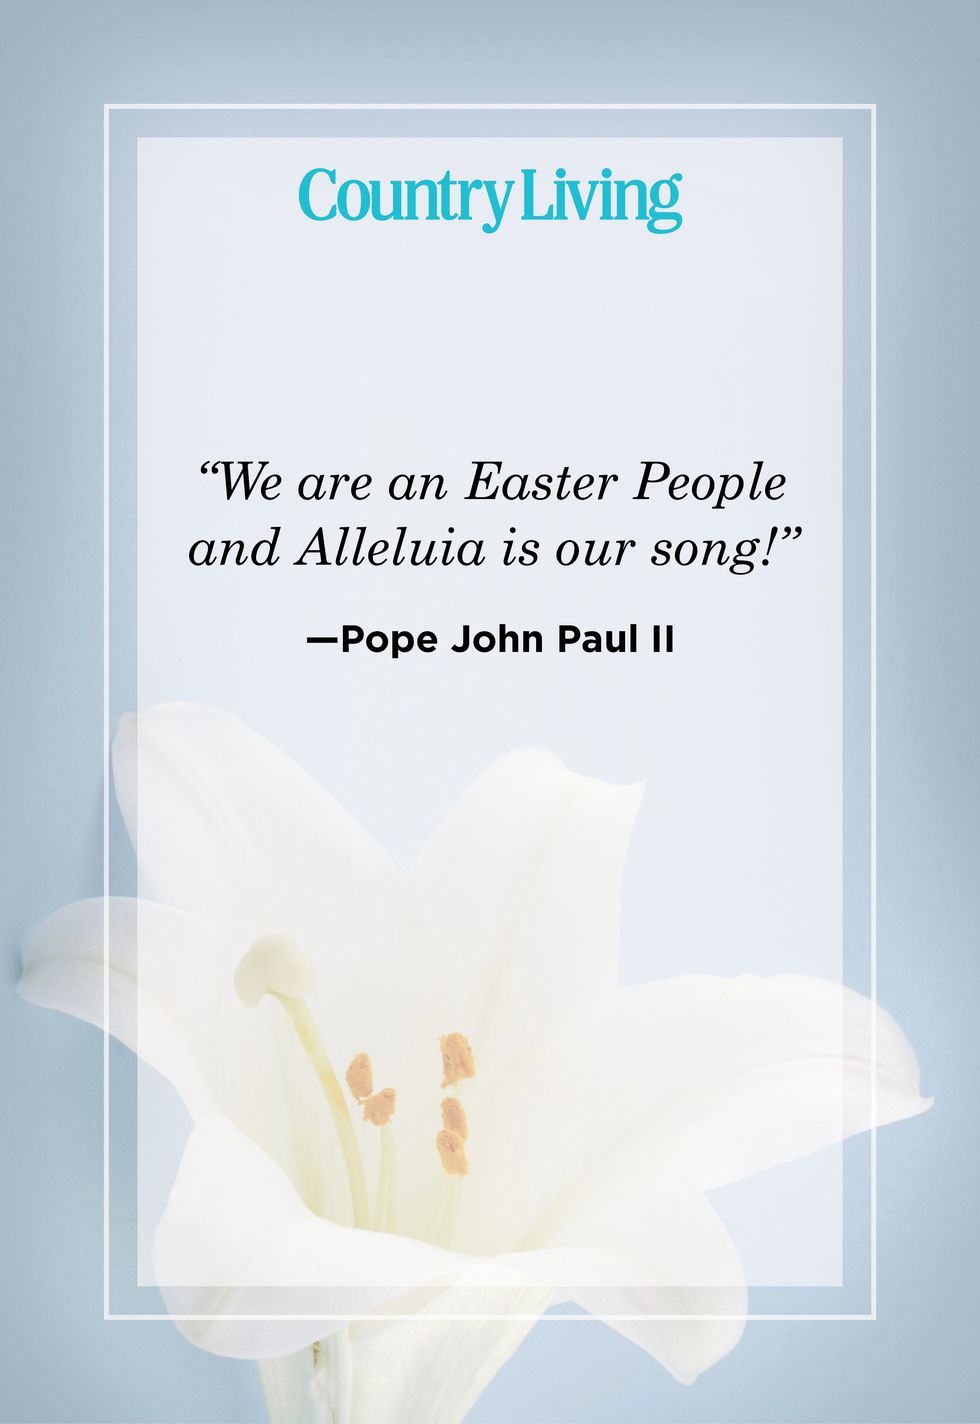 pope john paul 2nd easter quote with photo of easter lily